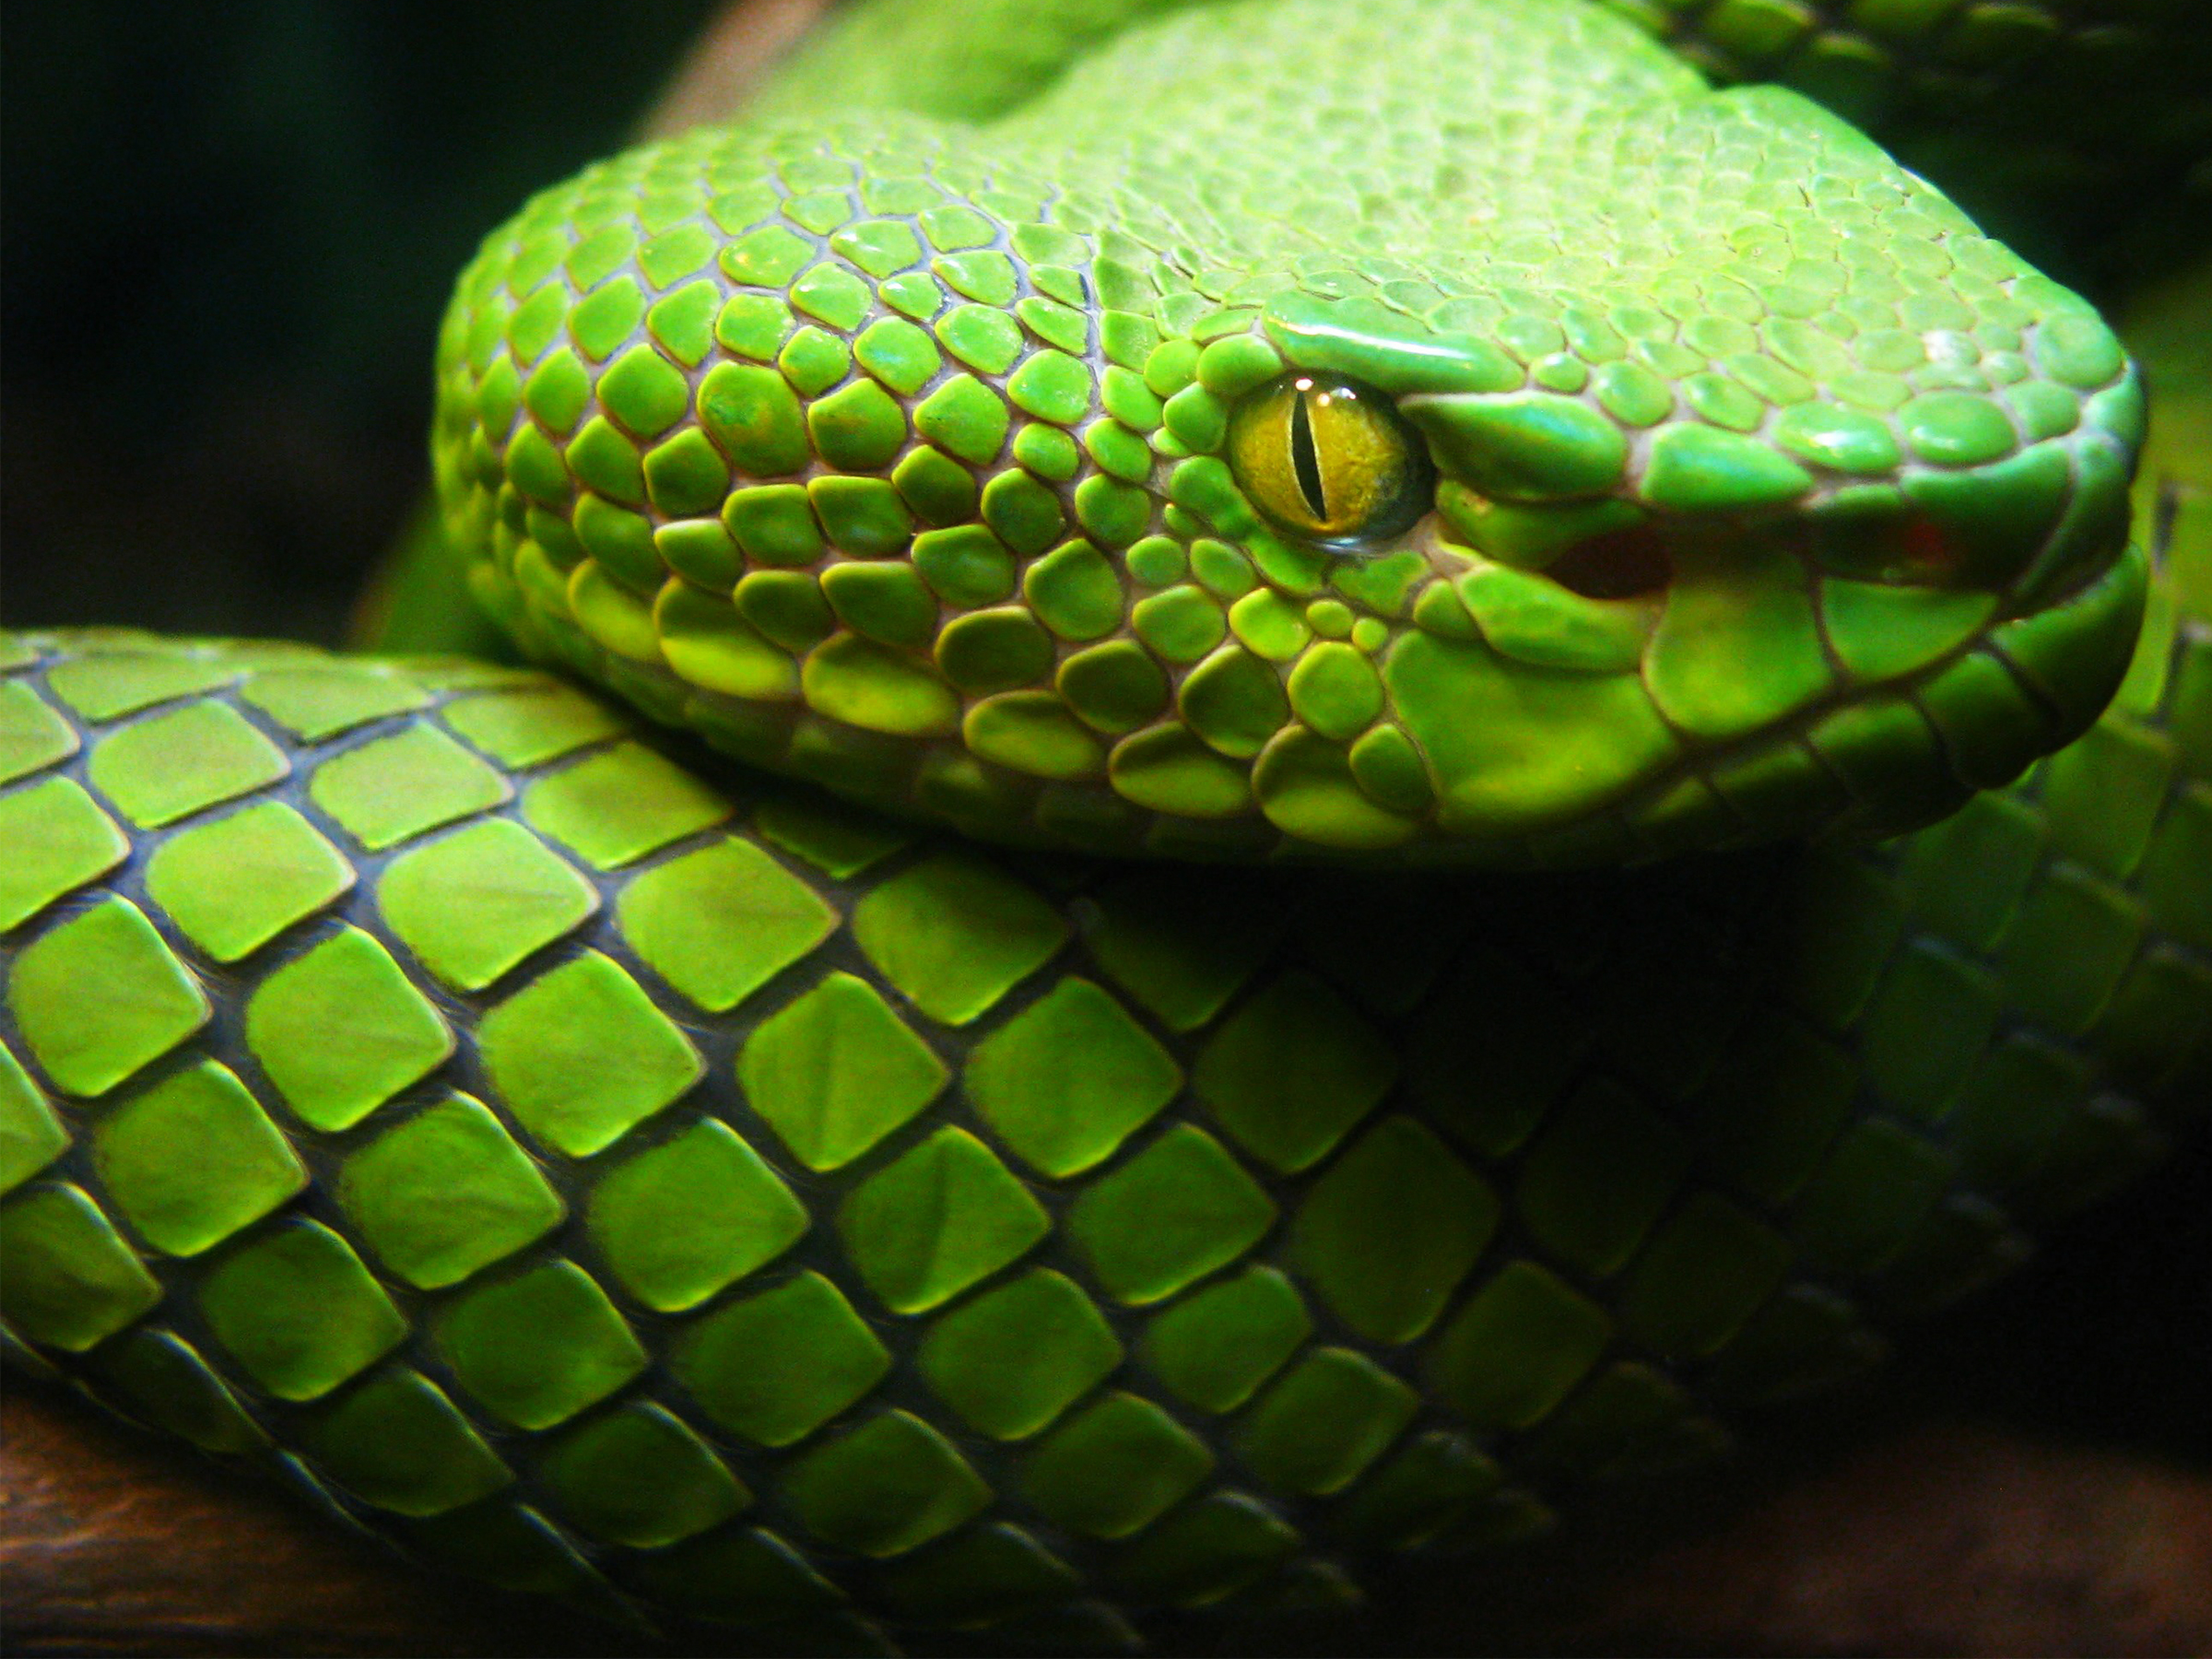 Answering Why Snakes Are Long Could Help Repair Human Spinal Cords